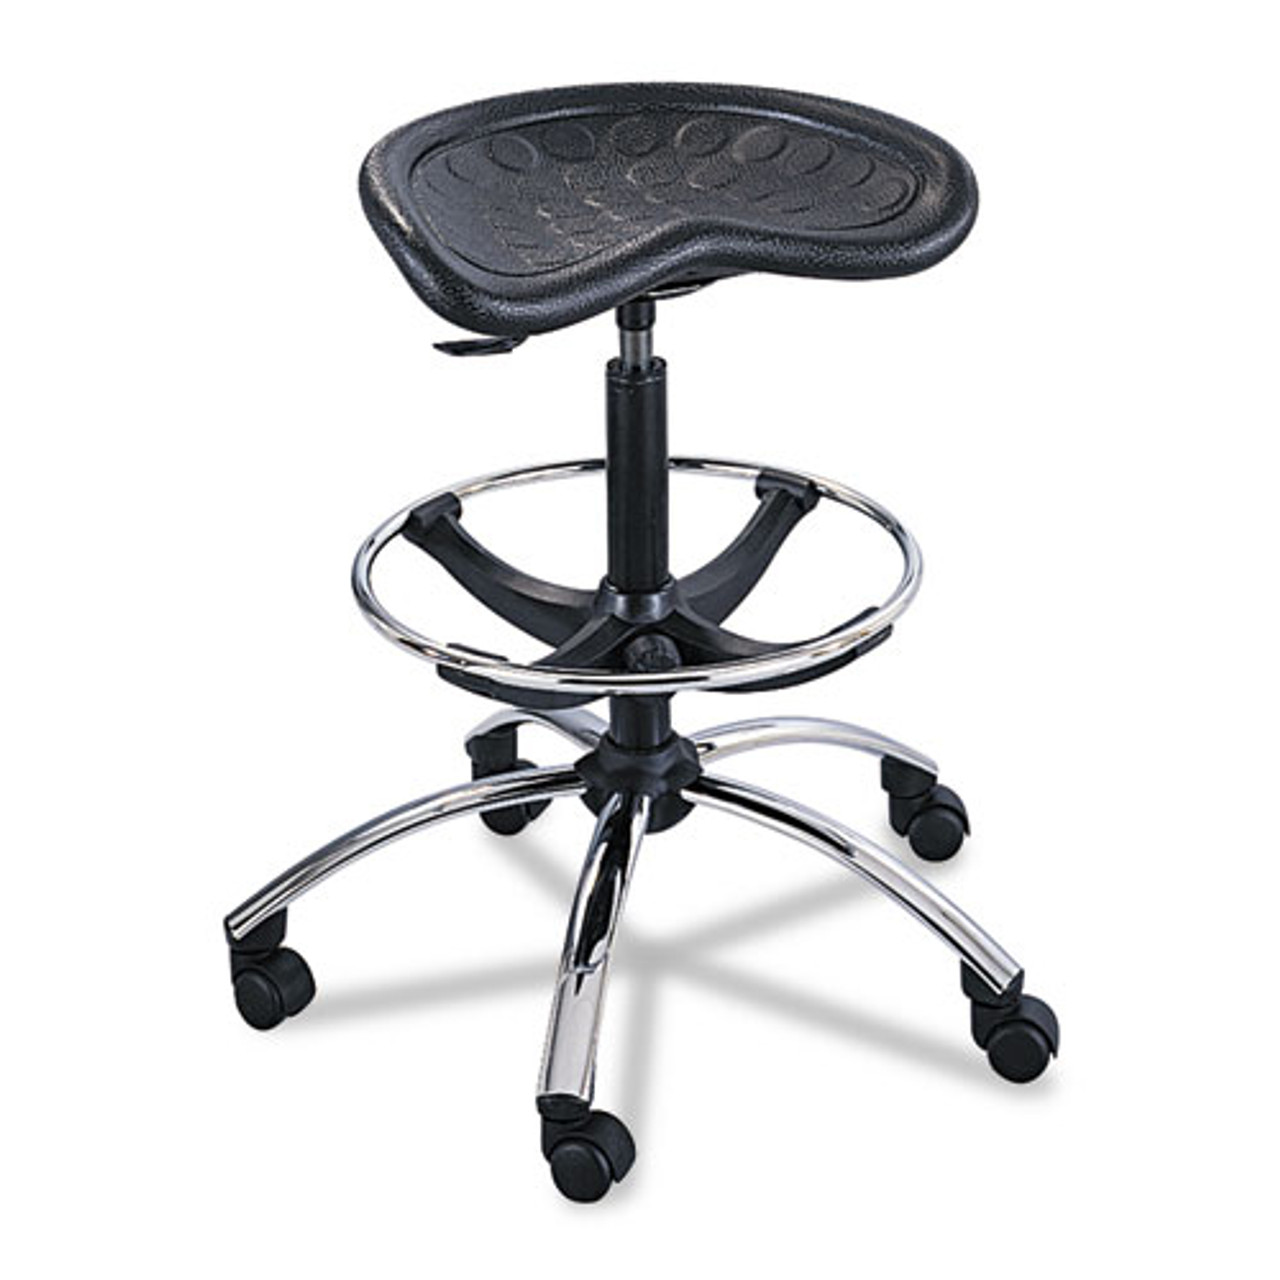 Sit-Star Stool With Footring And Casters, 27" To 36"h Seat, Black/chrome, #SF-5549-BL